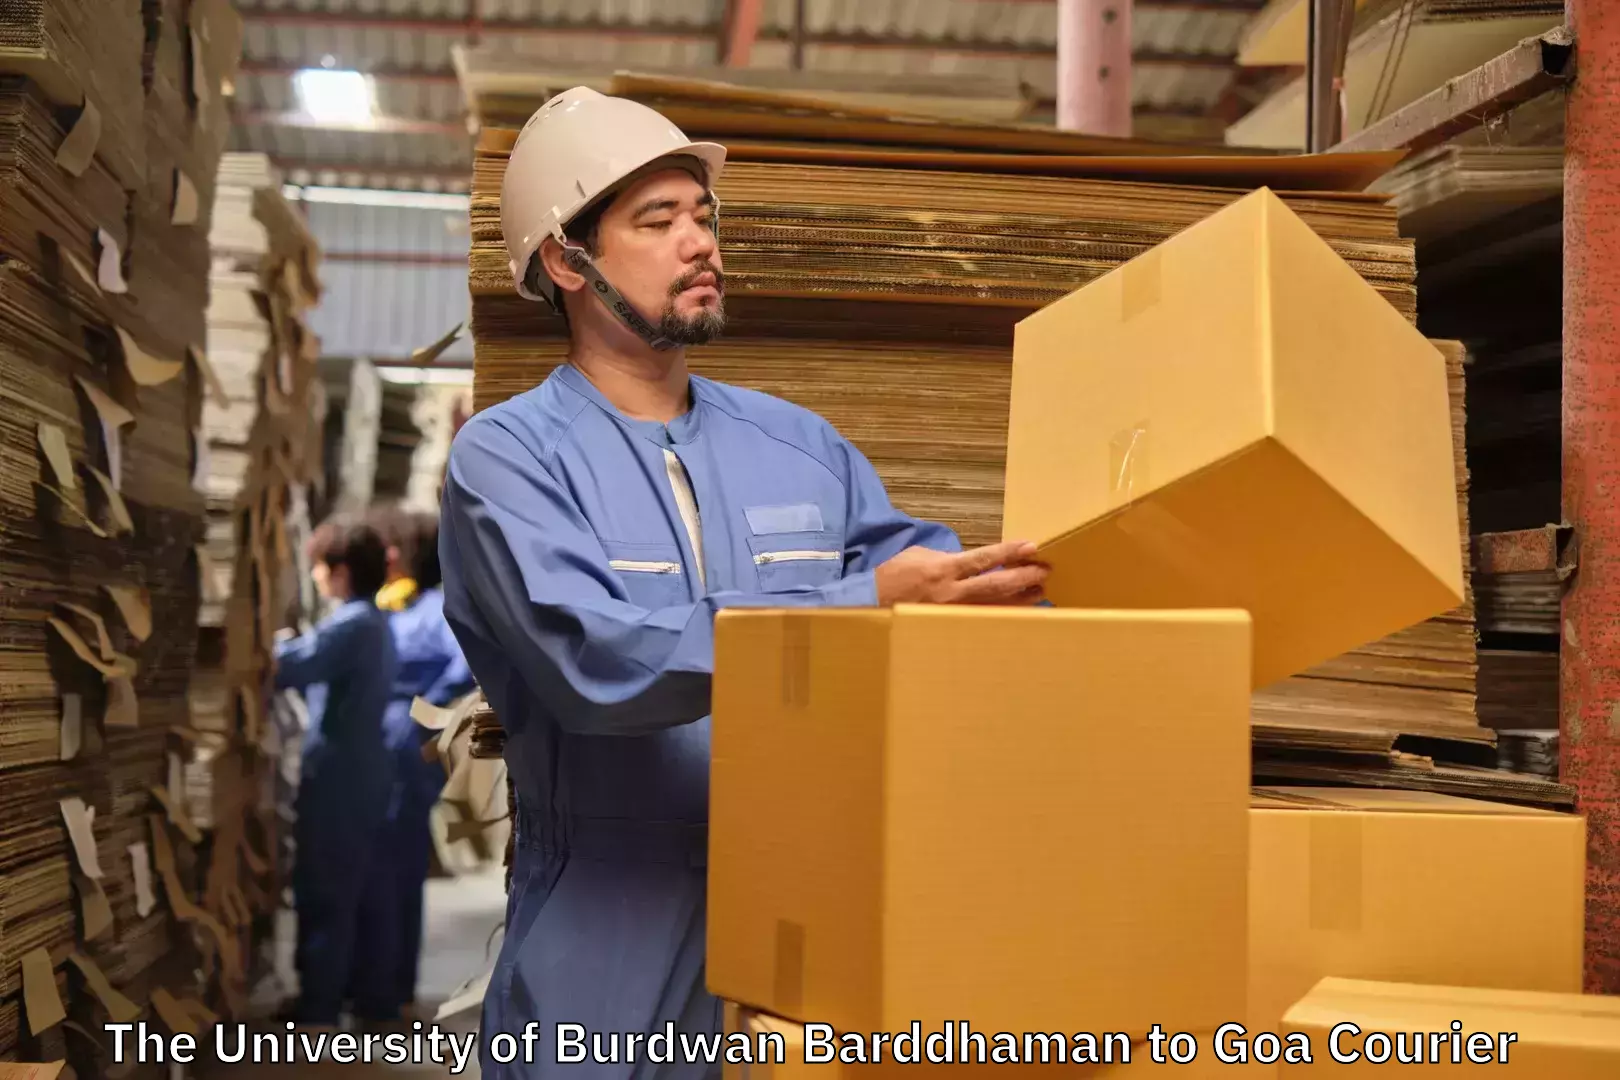 Luggage shipment specialists The University of Burdwan Barddhaman to South Goa